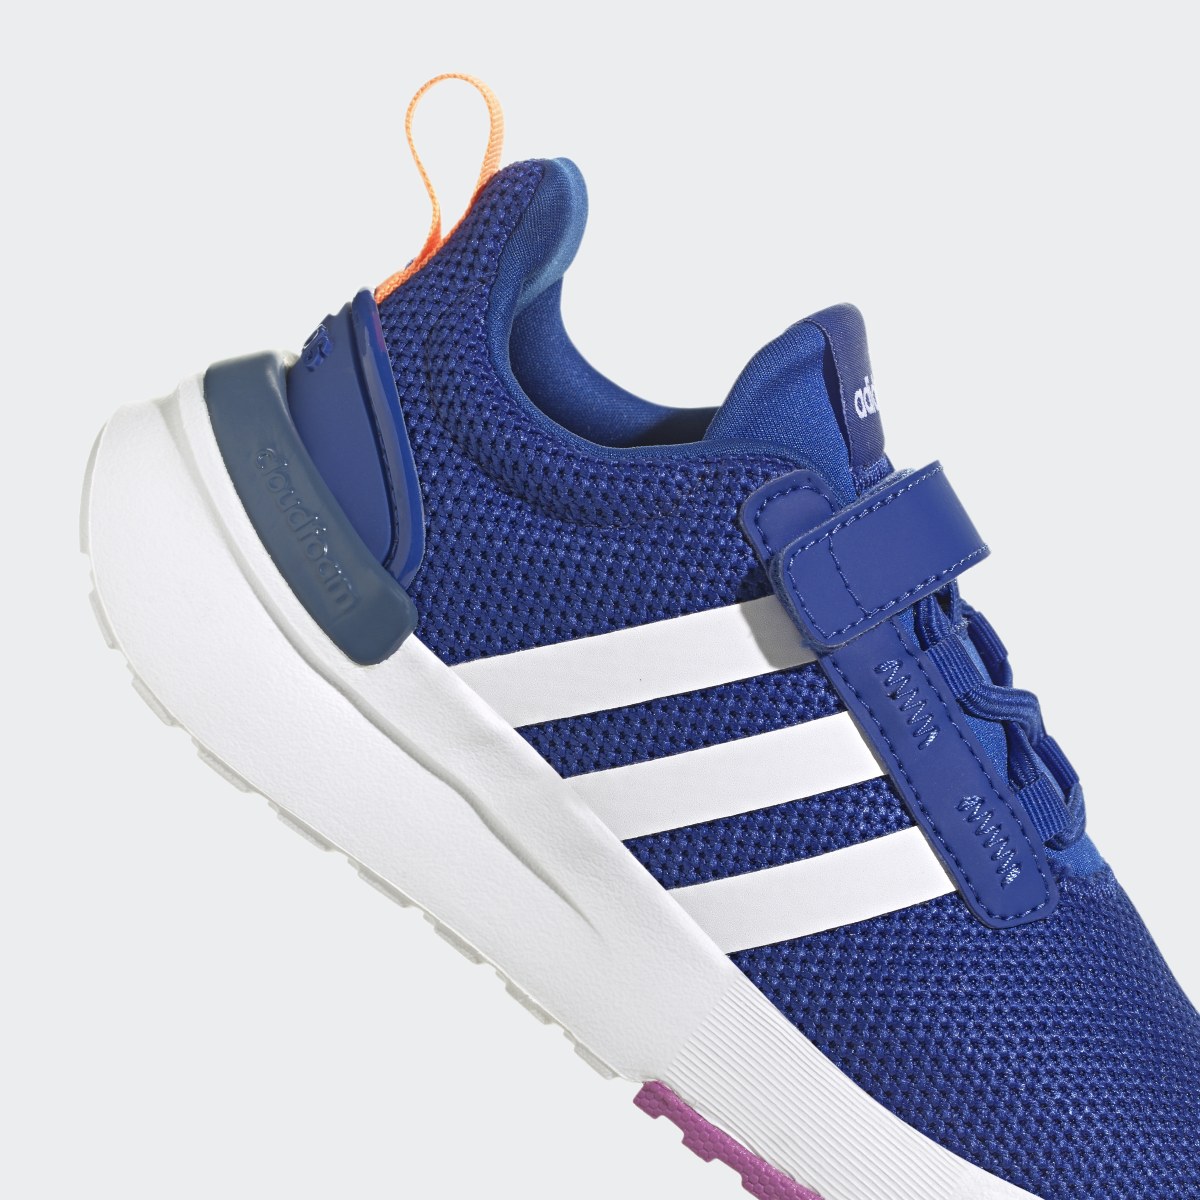 Adidas Racer TR21 Shoes. 9